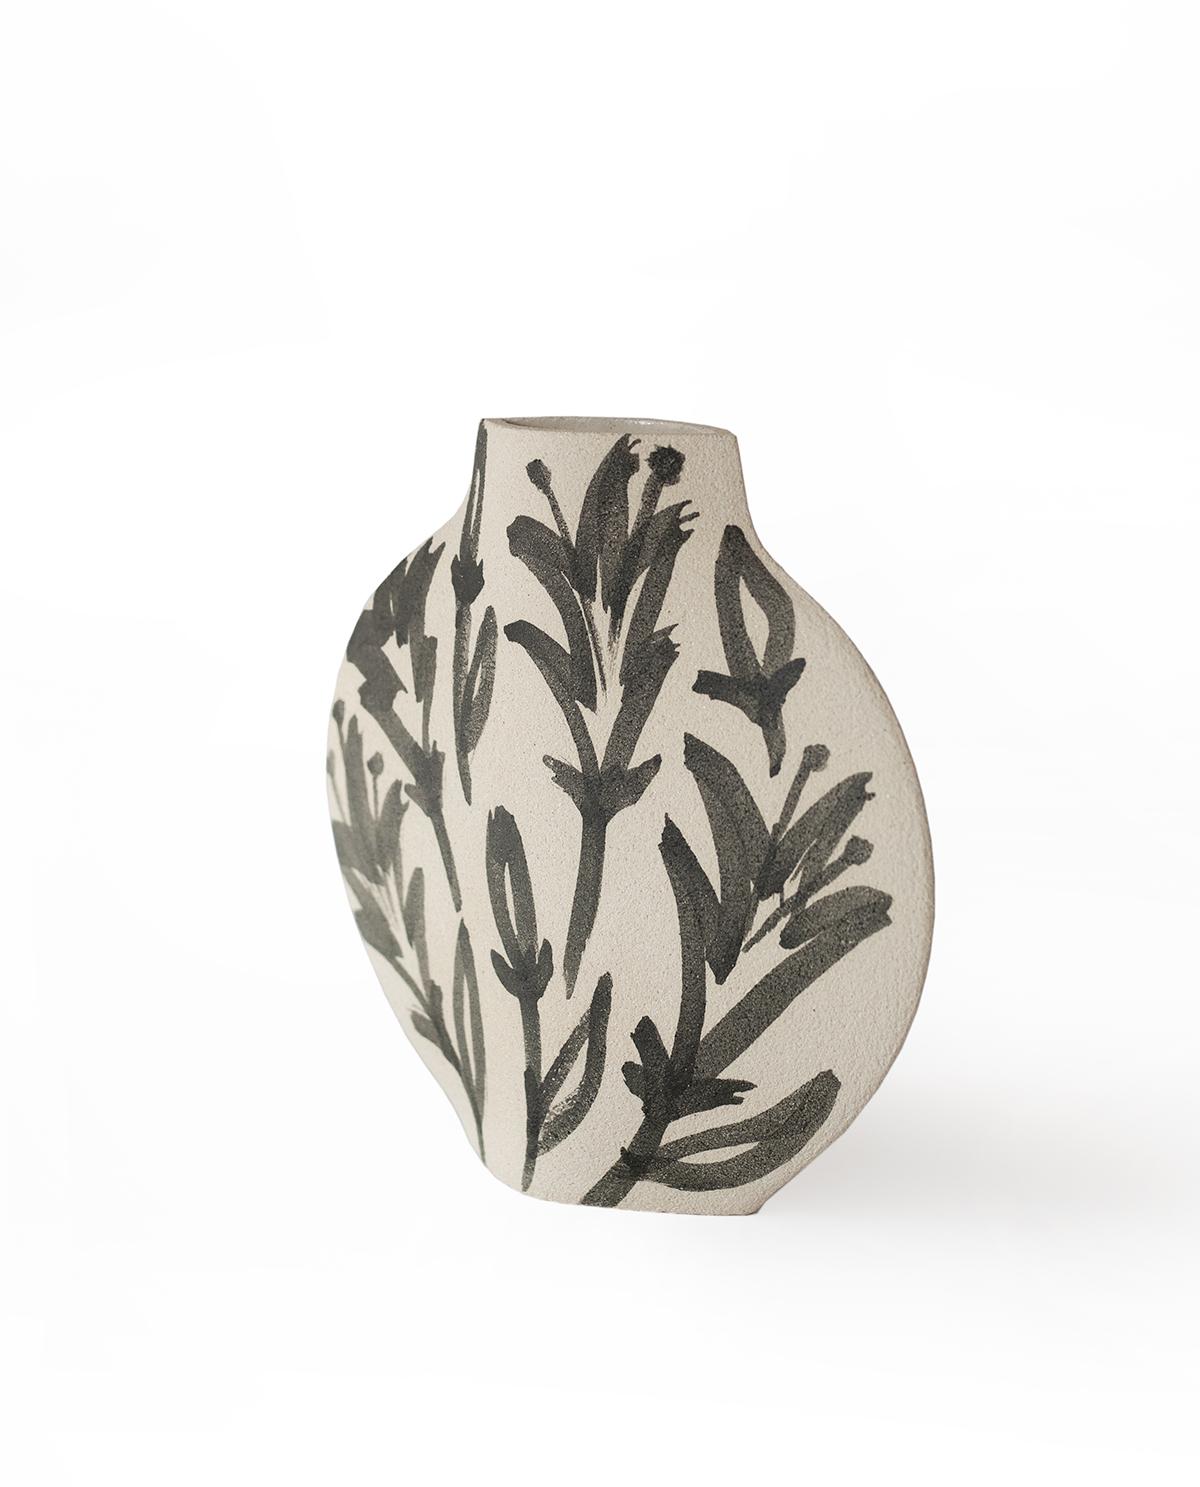 'Lilies’ handmade white ceramic vase.

This vase is part of a new series inspired by flowers (and more generally organic elements). Here is our Lune [M] model with motifs based on lily flowers. They are hand painted on the vase before its first